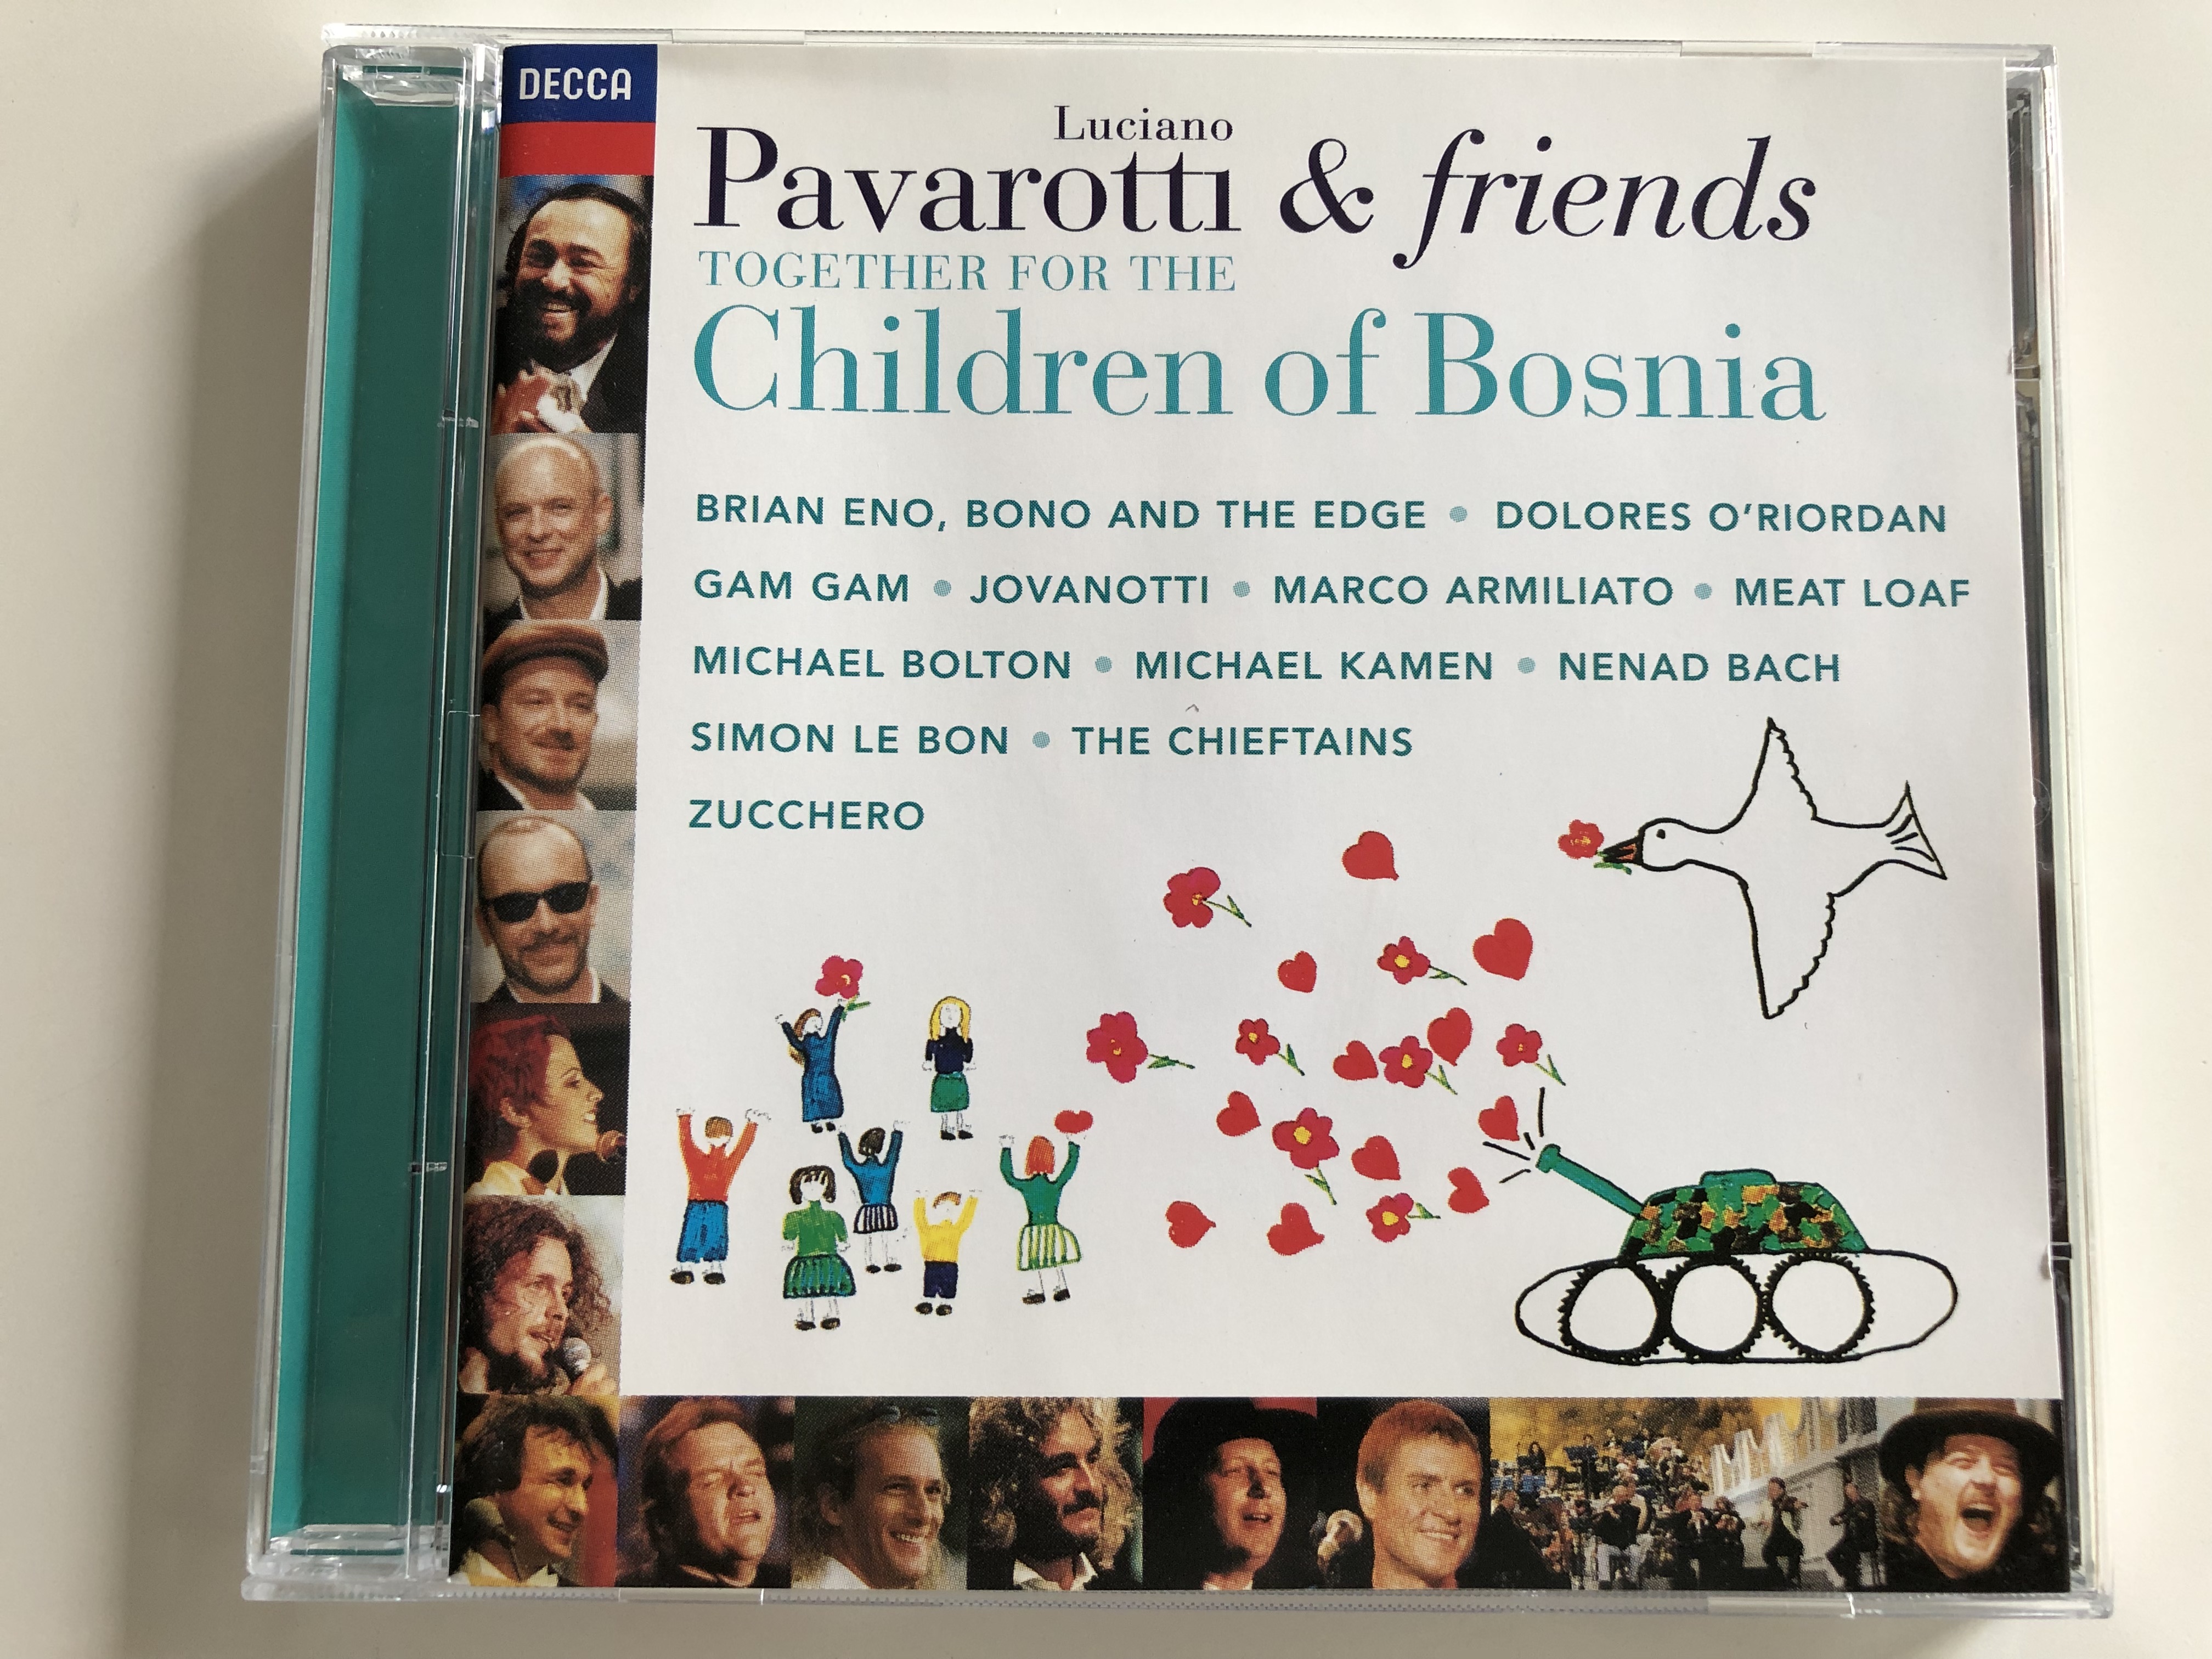 luciano-pavarotti-friends-together-for-the-children-of-bosnia-brian-eno-bono-and-the-edge-gam-gam-jovanotti-meat-loaf-michael-kamen-the-chieftans-zucchero-live-from-the-parco-novi-sad-modena-1995-audio-cd-1996-d-1-.jpg